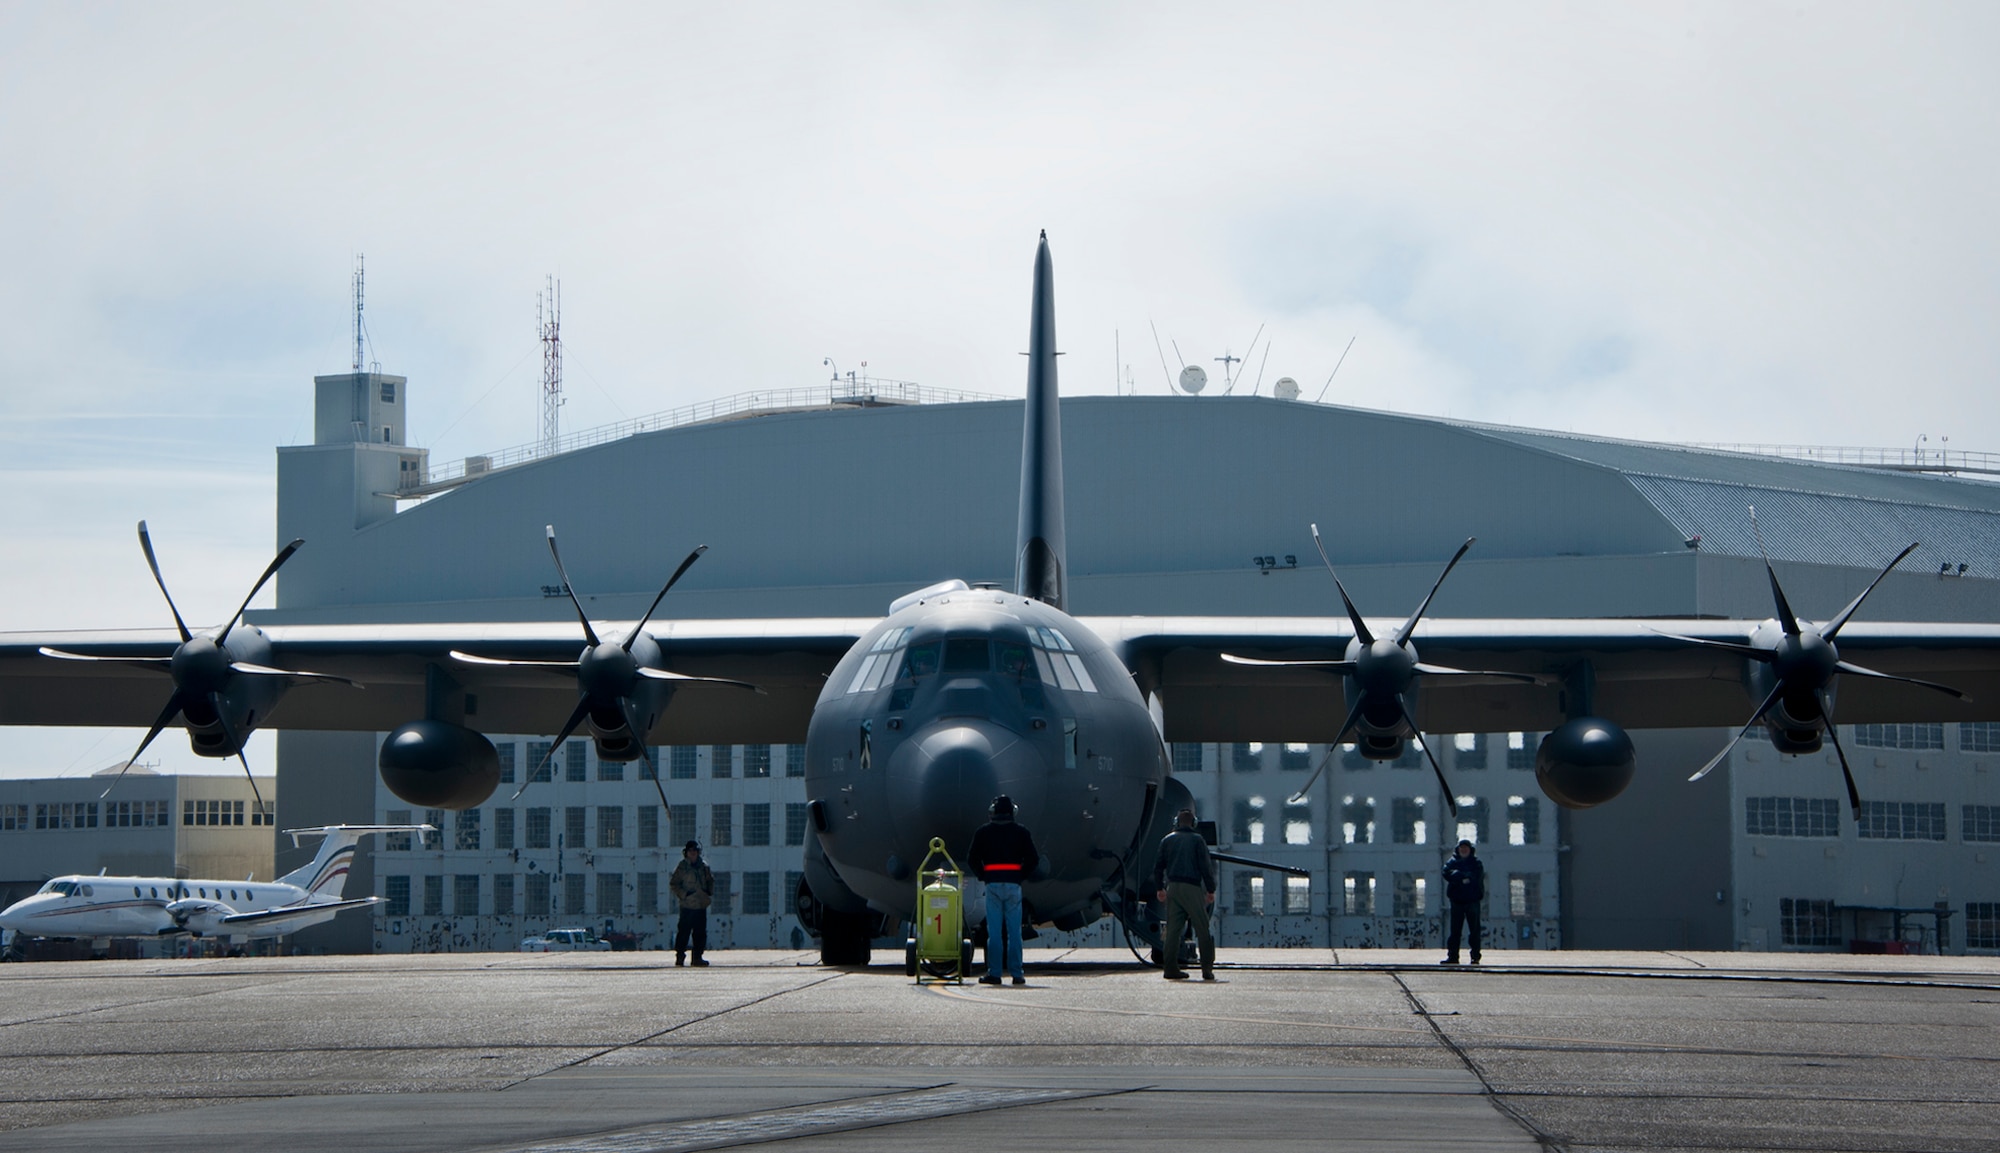 The aircrew from Eglin’s 413th Flight Test Squadron readies the newly created AC-130J Ghostrider for its first official sortie Jan. 31 at Eglin Air Force Base, Fla. The Air Force Special Operations Command MC-130J arrived at Eglin in January 2013 to begin the modification process for the AC-130J, whose primary mission is close air support, air interdiction and armed reconnaissance. A total of 32 MC-130J prototypes will be modified as part of a $2.4 billion AC-130J program to grow the future fleet. (U.S. Air Force photo/Sara Vidoni)